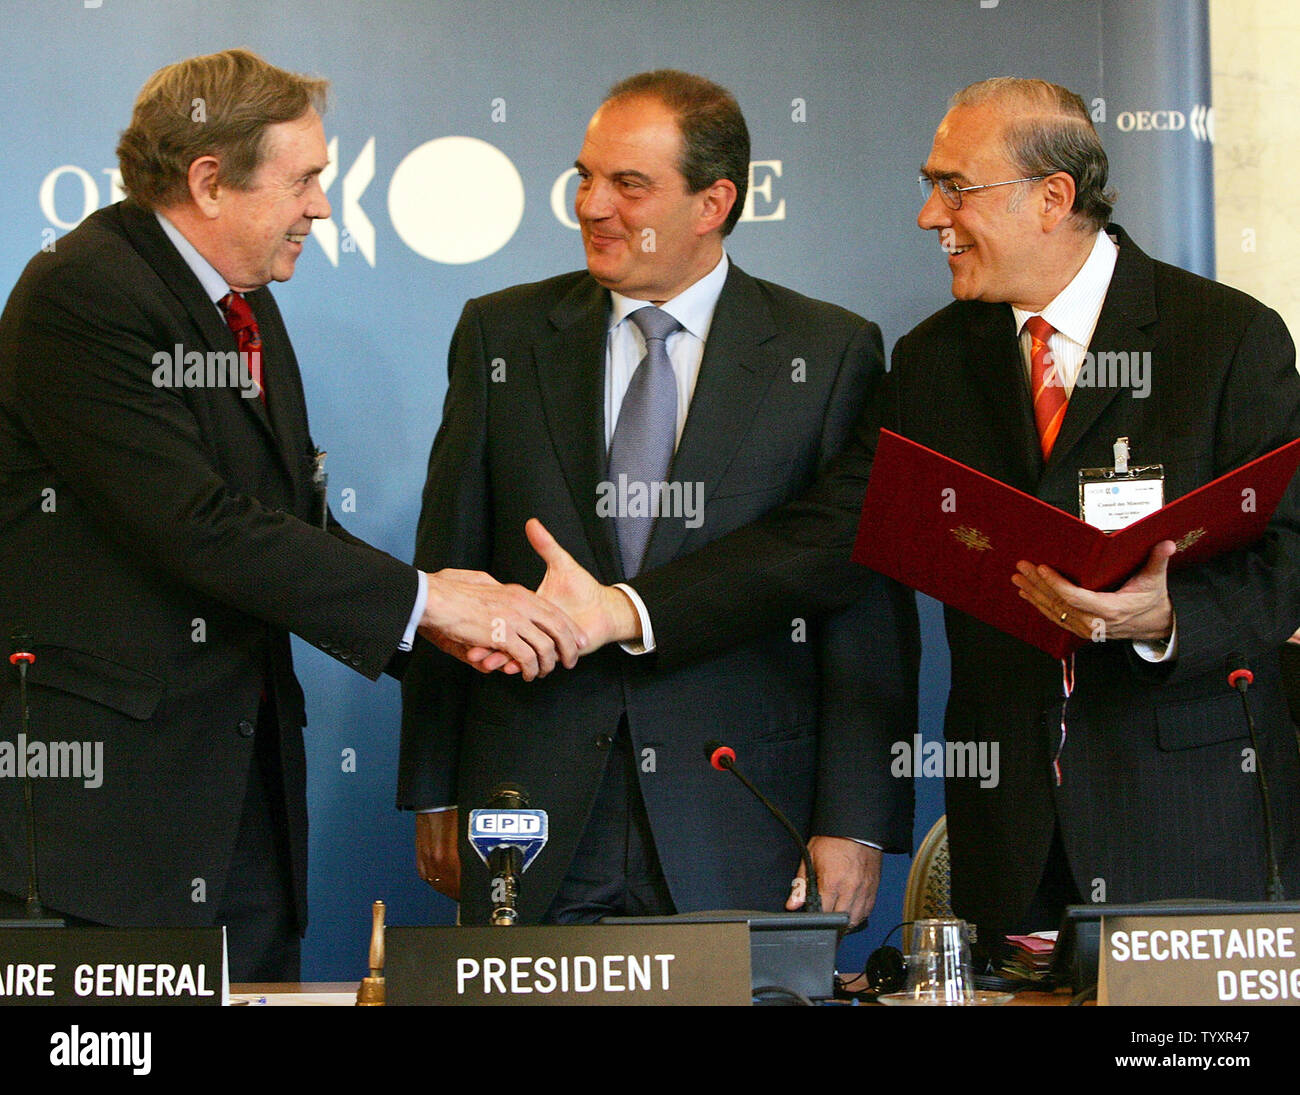 Former Mexican Finance Minister and incoming OECD head Angel Gurria (R) poses with outgoing Secretary-General of the OECD Donald Johnston of Canada on May 24, 2006, in Paris, during the OECD annual conference, chaired by Greek Prime Minister Costas Caramanlis (2C). Gurria, 56, will officially take the reins from Johnston on June 1, 2006.  (UPI Photo/JACQUES BRINON/OCDE) Stock Photo